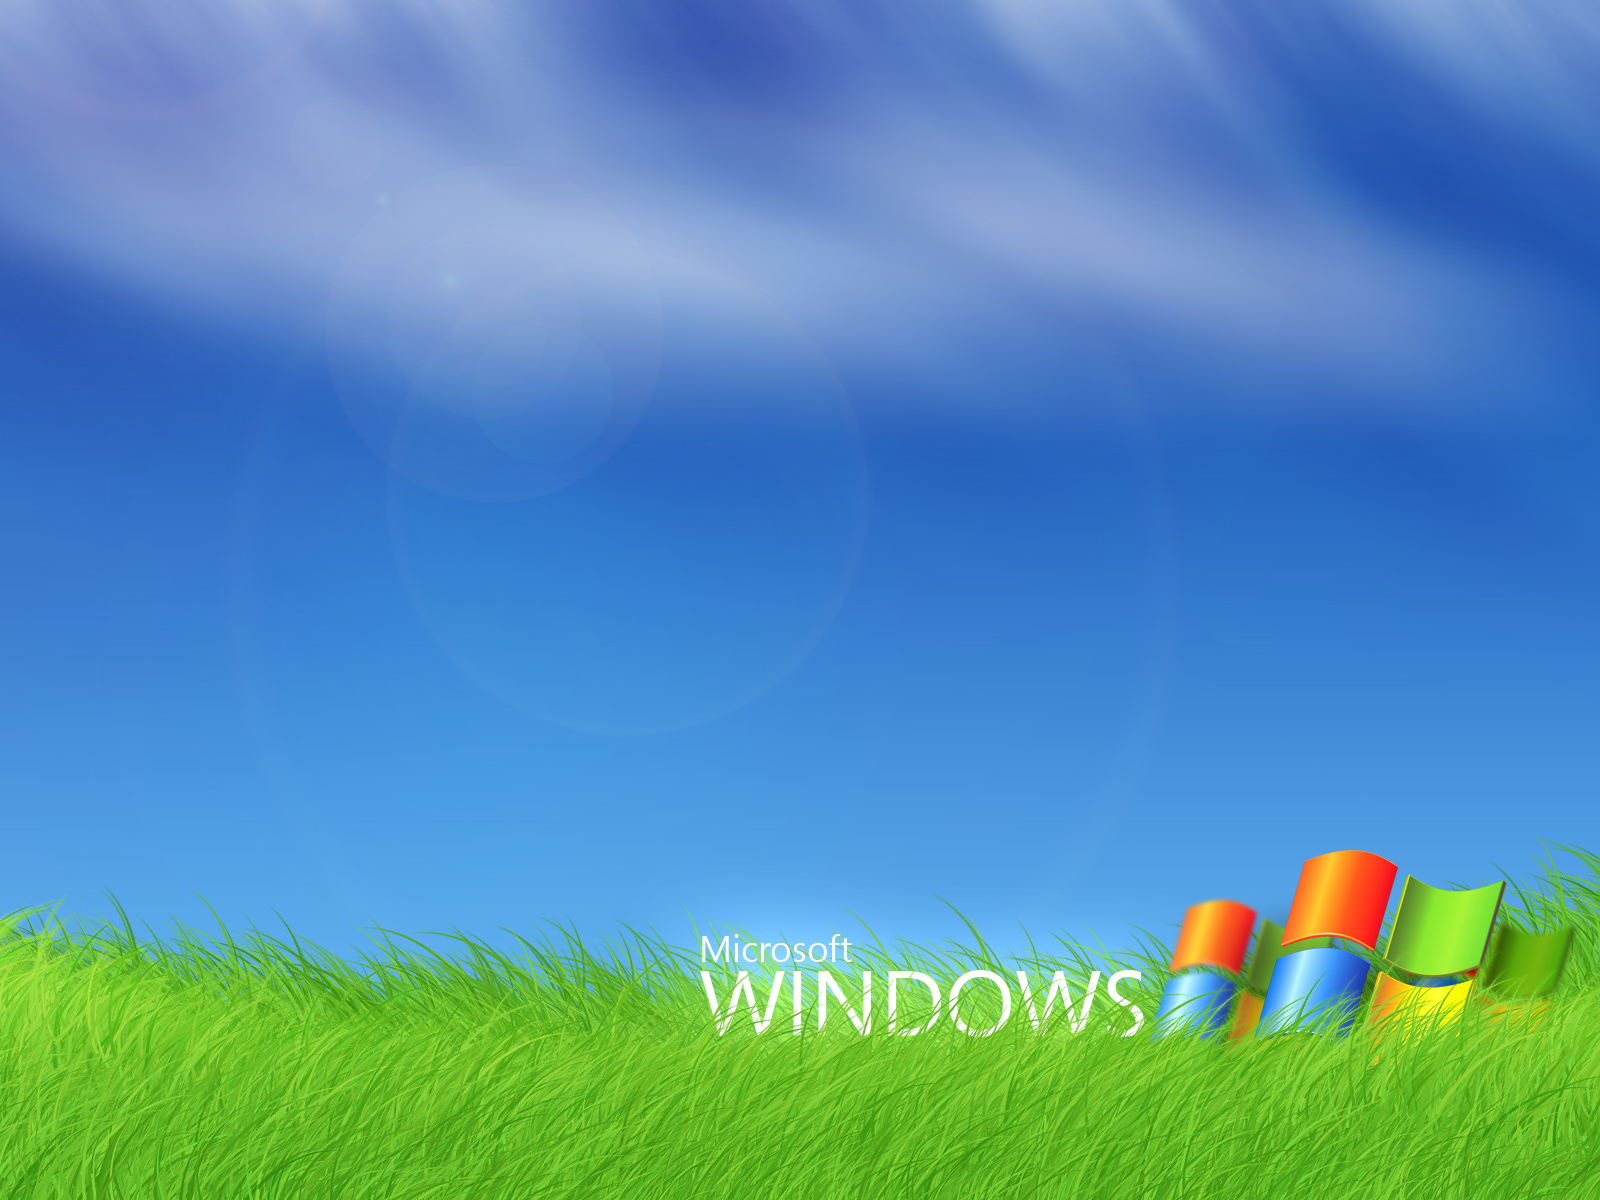 Free Download Download Microsoft Windows 8 Wallpapers Pack 2 Wallpapers